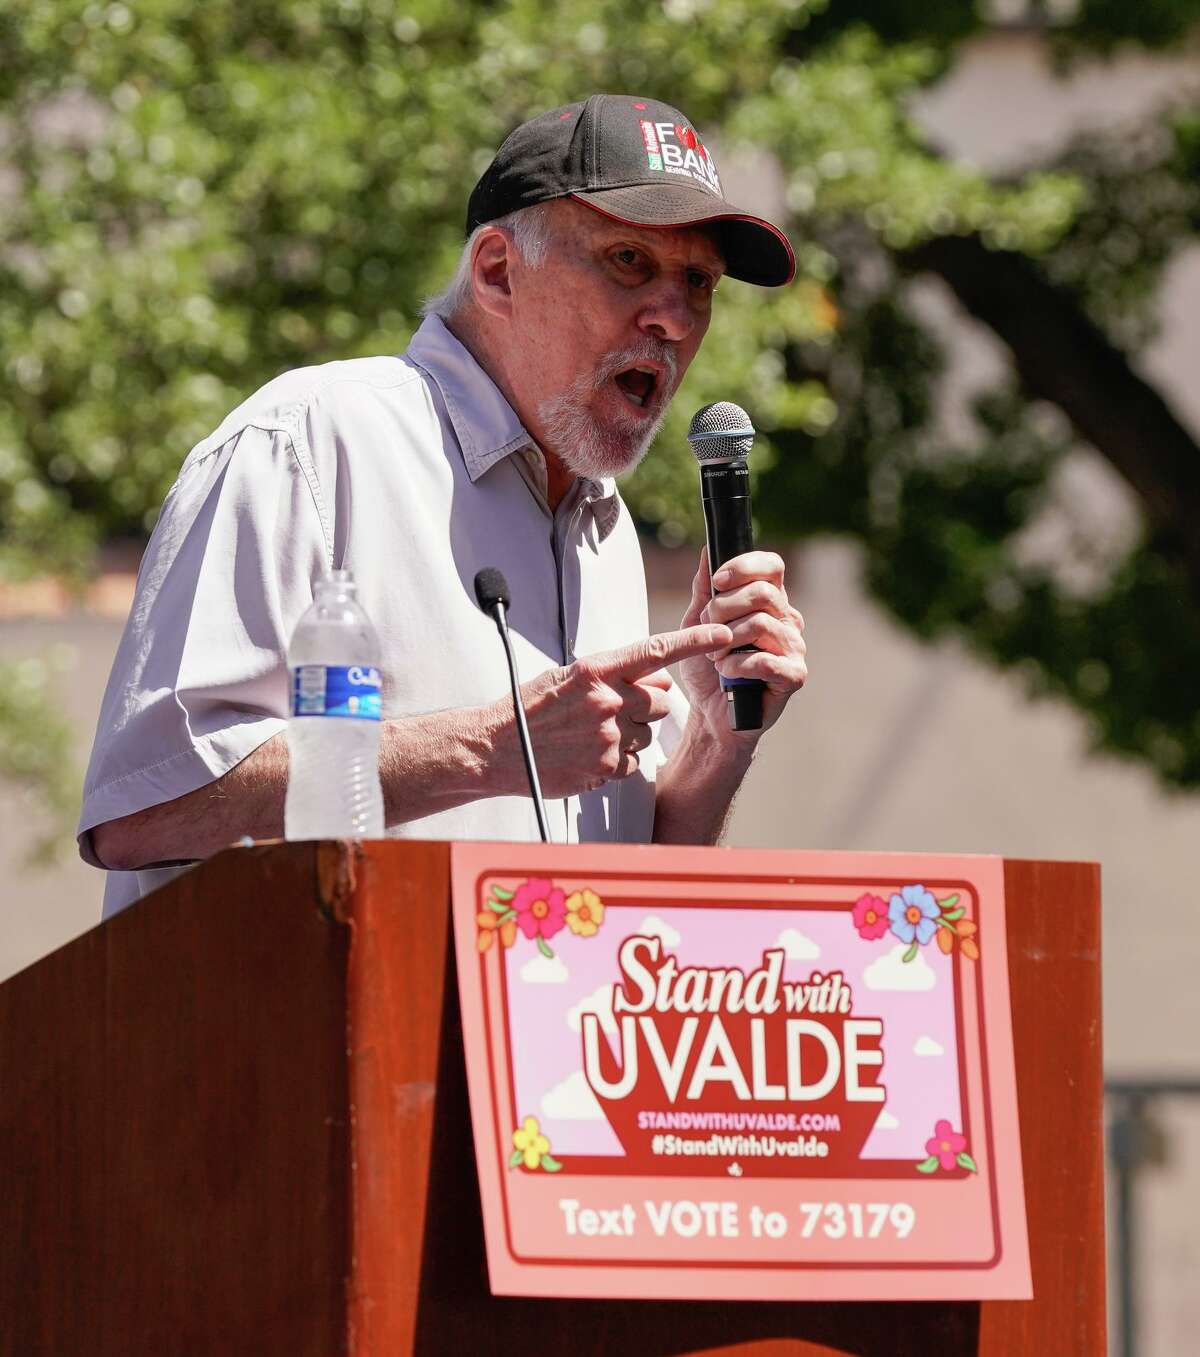 Spurs Coach Gregg Popovich speaks during a "Stand with Uvalde" call to action rally Saturday morning in Travis Park.